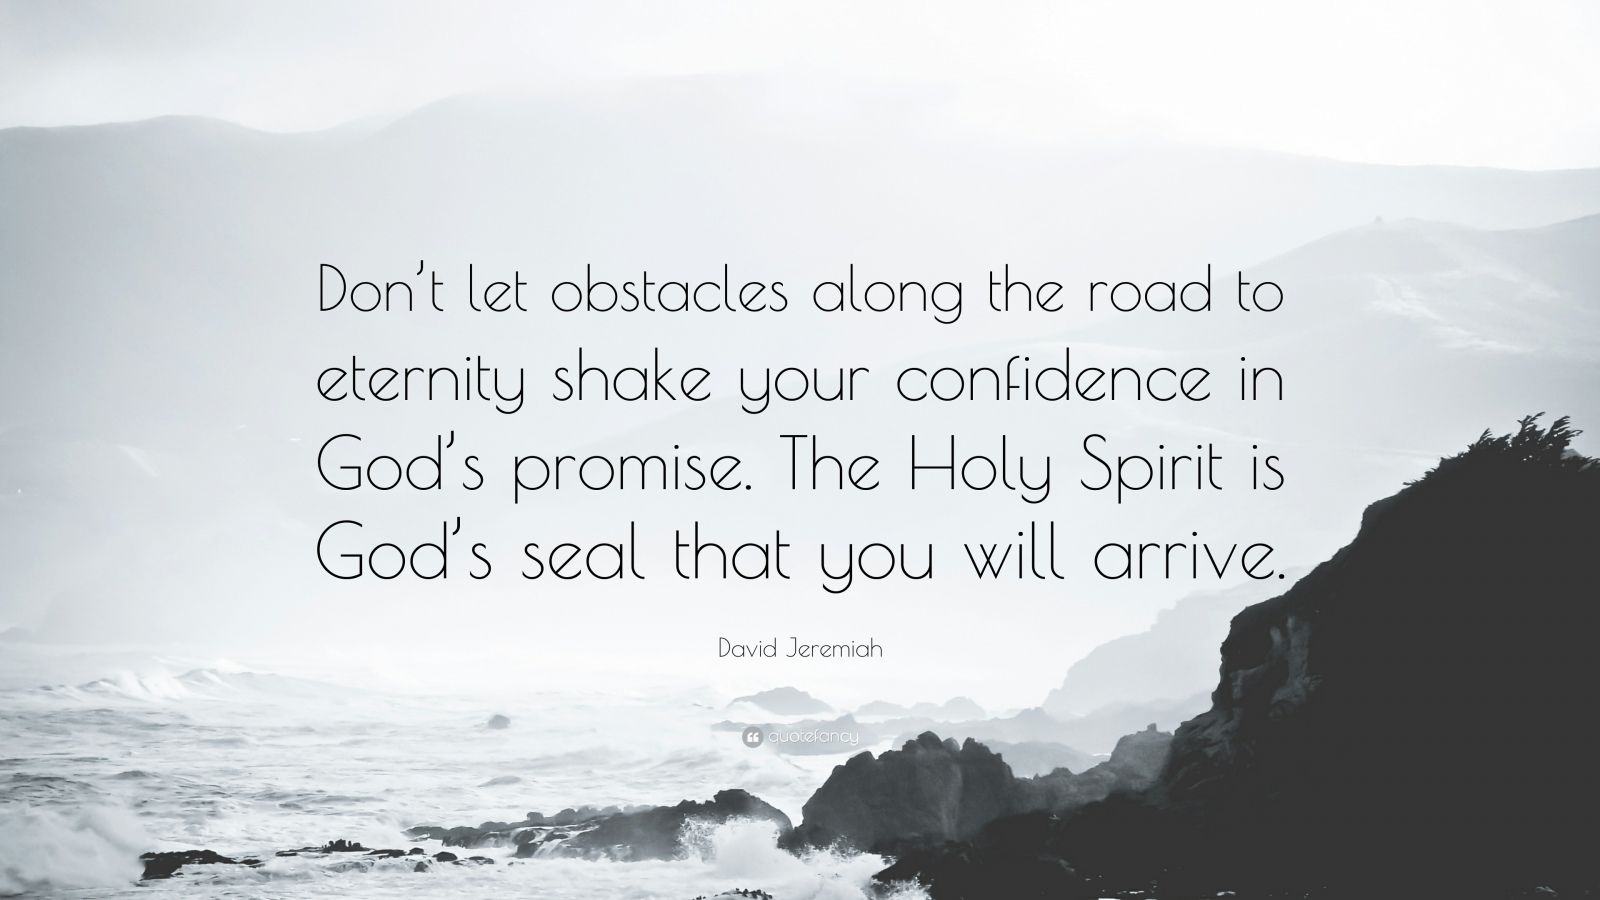 David Jeremiah Quote “Don t let obstacles along the road to eternity shake